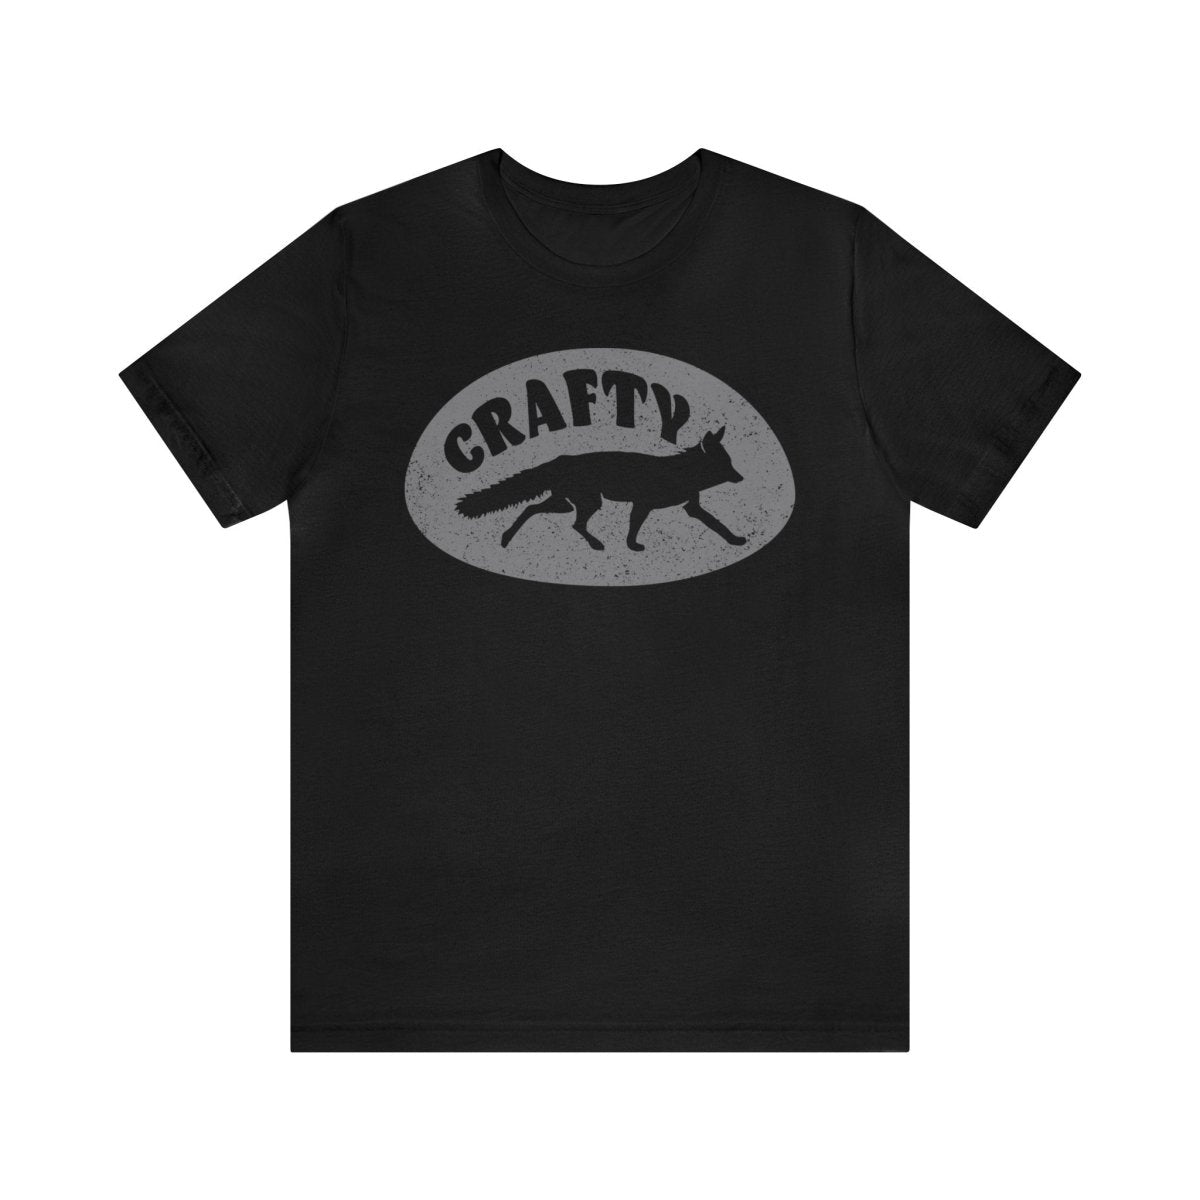 Crafty Premium T-Shirt, Like A Fox, Crafting, Creative, Maker, Artsy, Design, Home Made, Hobby, Sewing, Writing, Poetry, Video